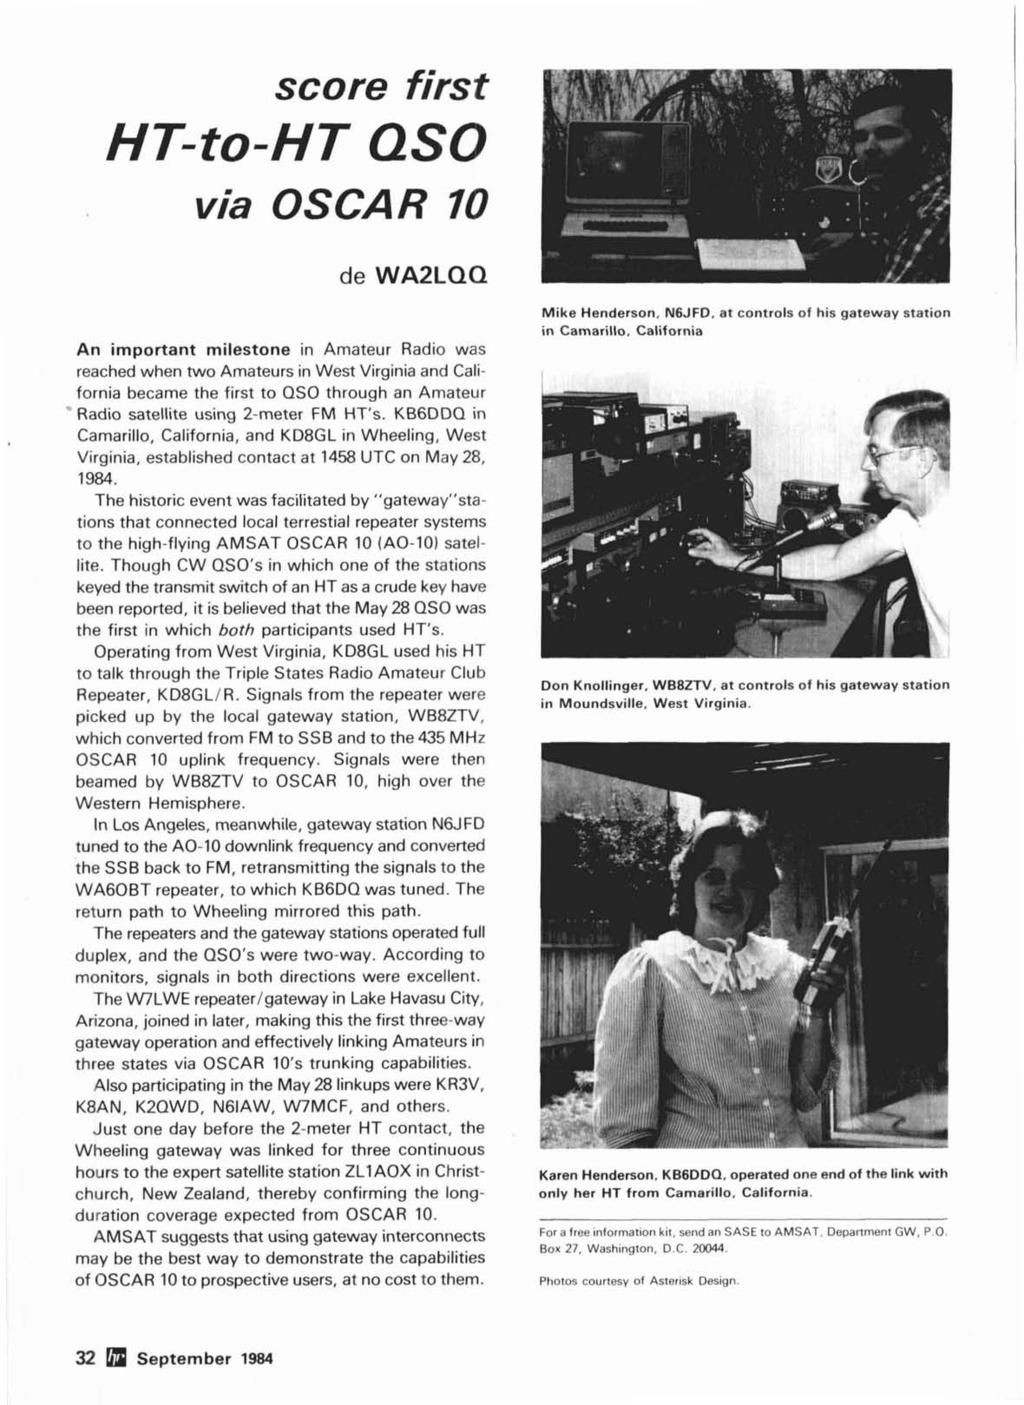 An important milestone in Amateur Radio was reached when two Amateurs in West Virginia and California became the first to QSO through an Amateur ' Radio satellite using 2-meter FM HT's.